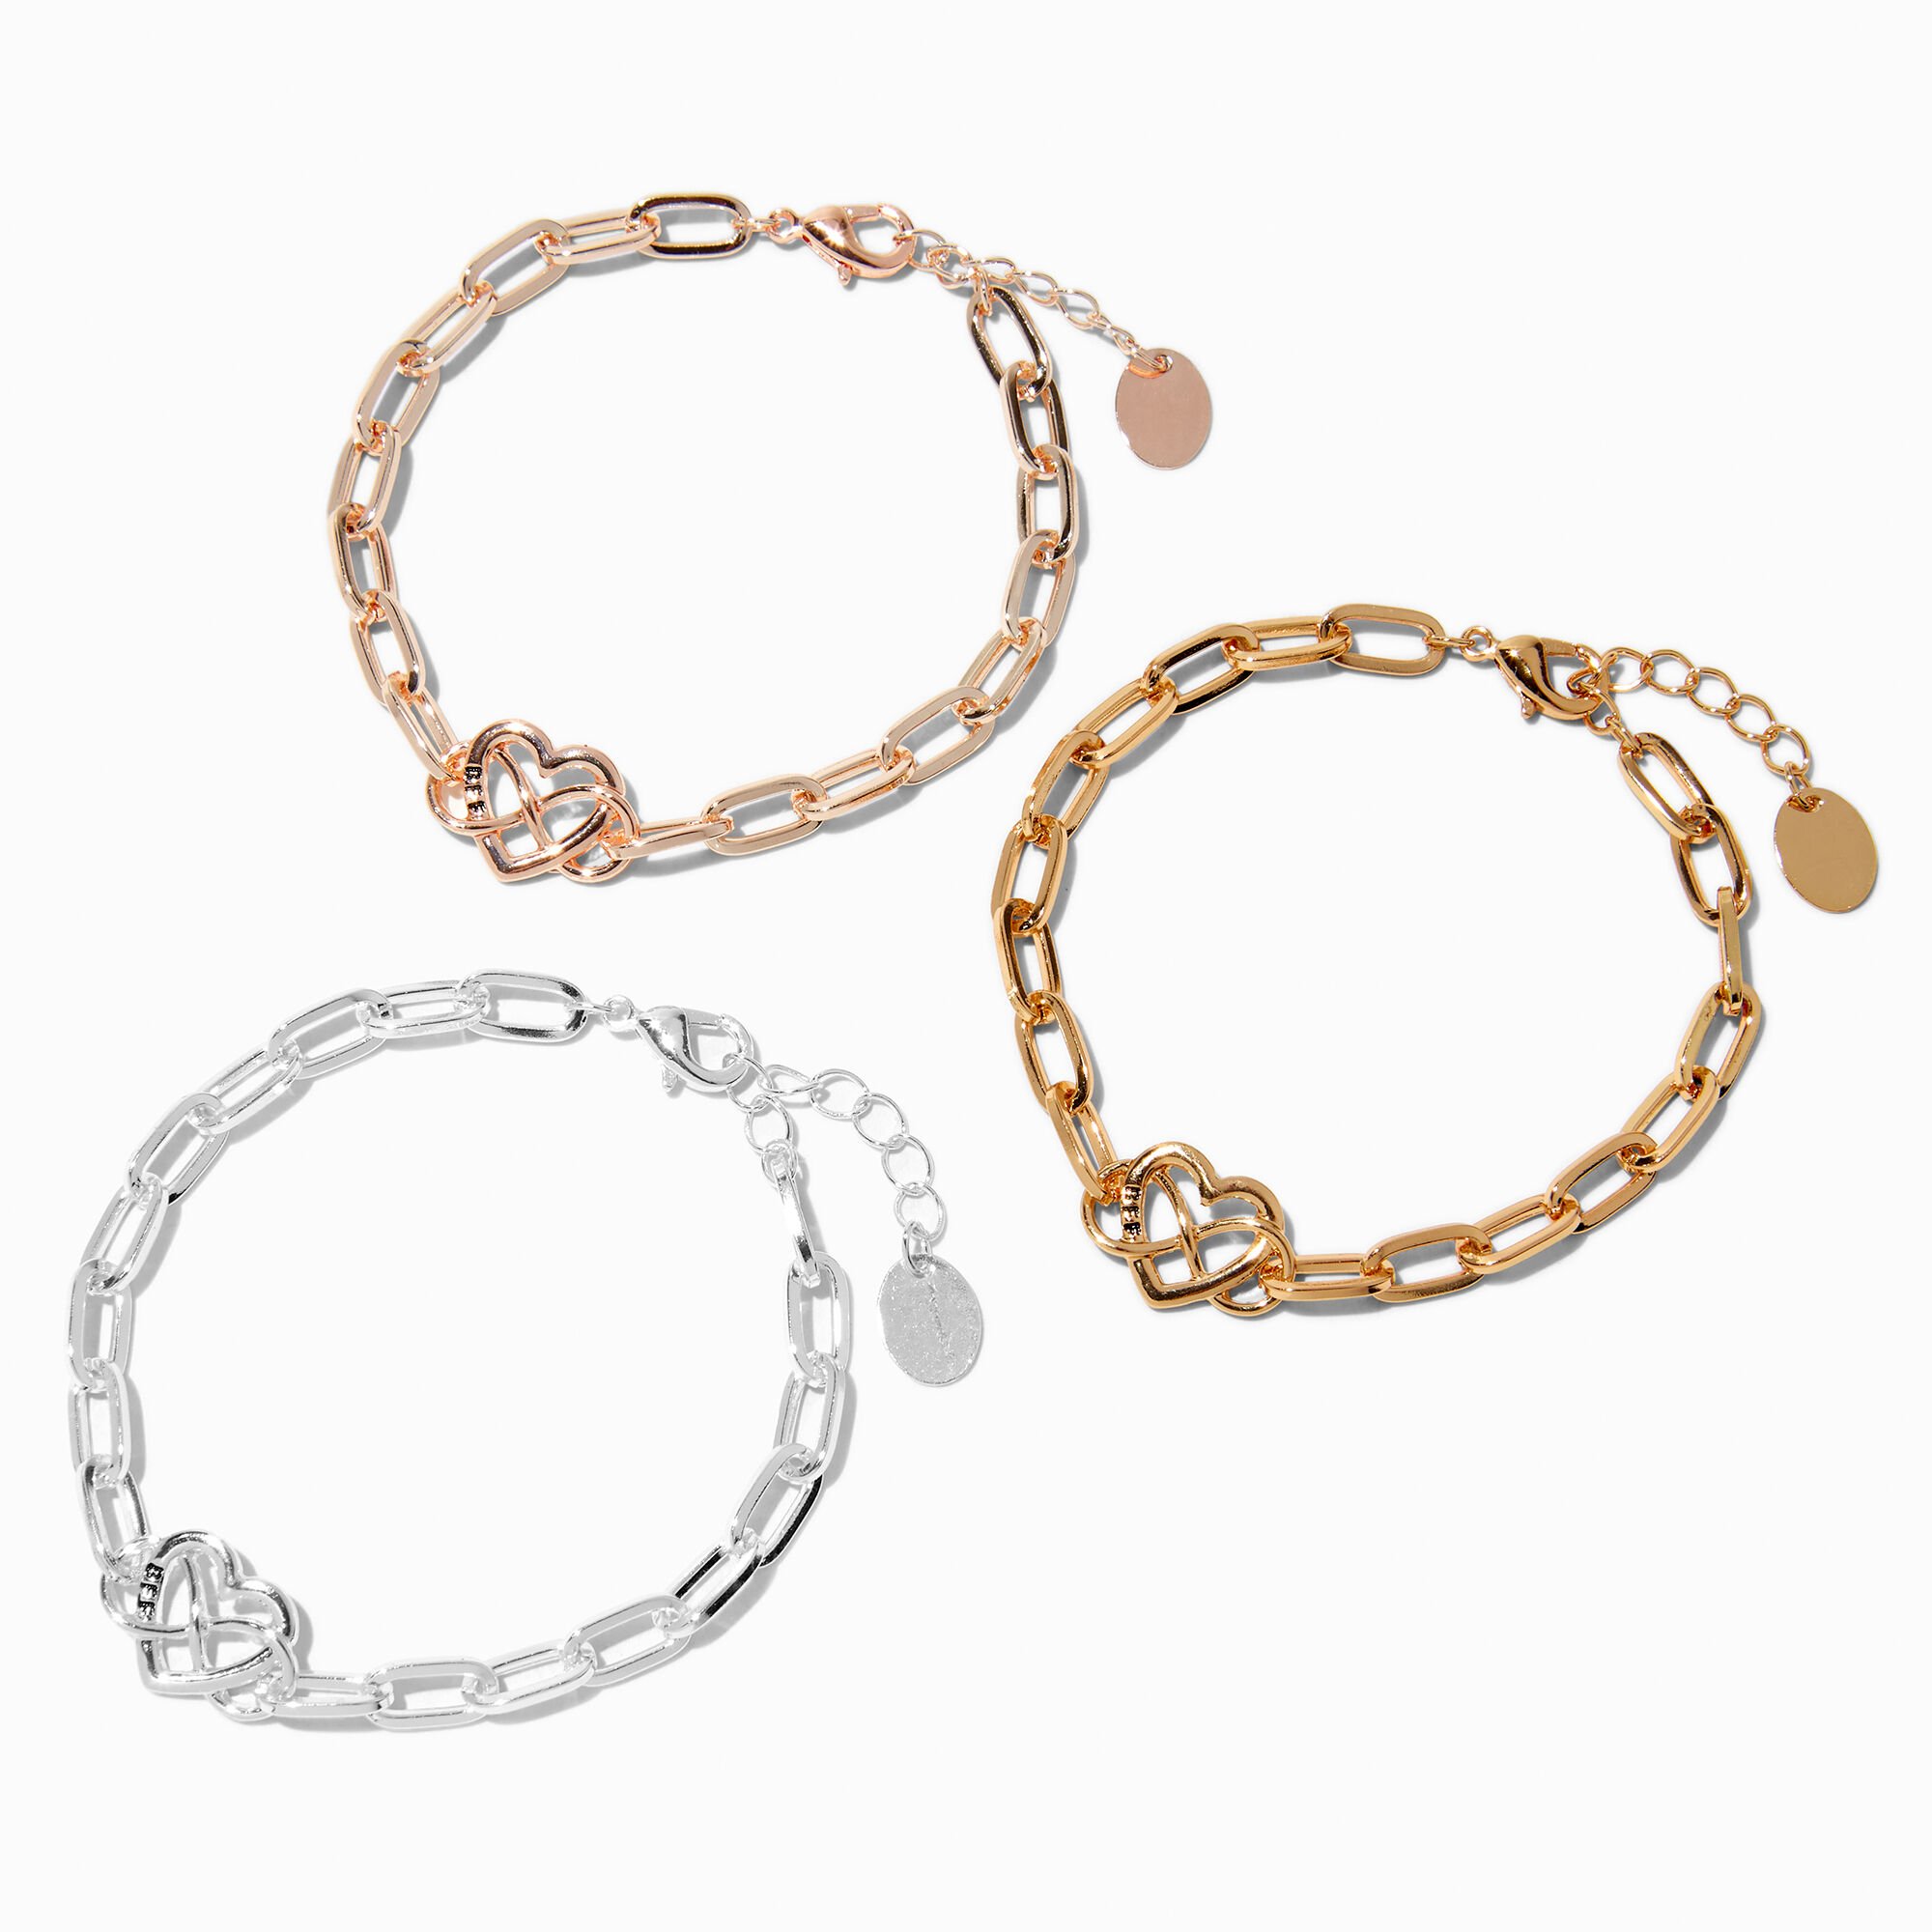 View Claires Best Friends Mixed Metal Infinity Heart Bracelets 3 Pack Rose Gold information